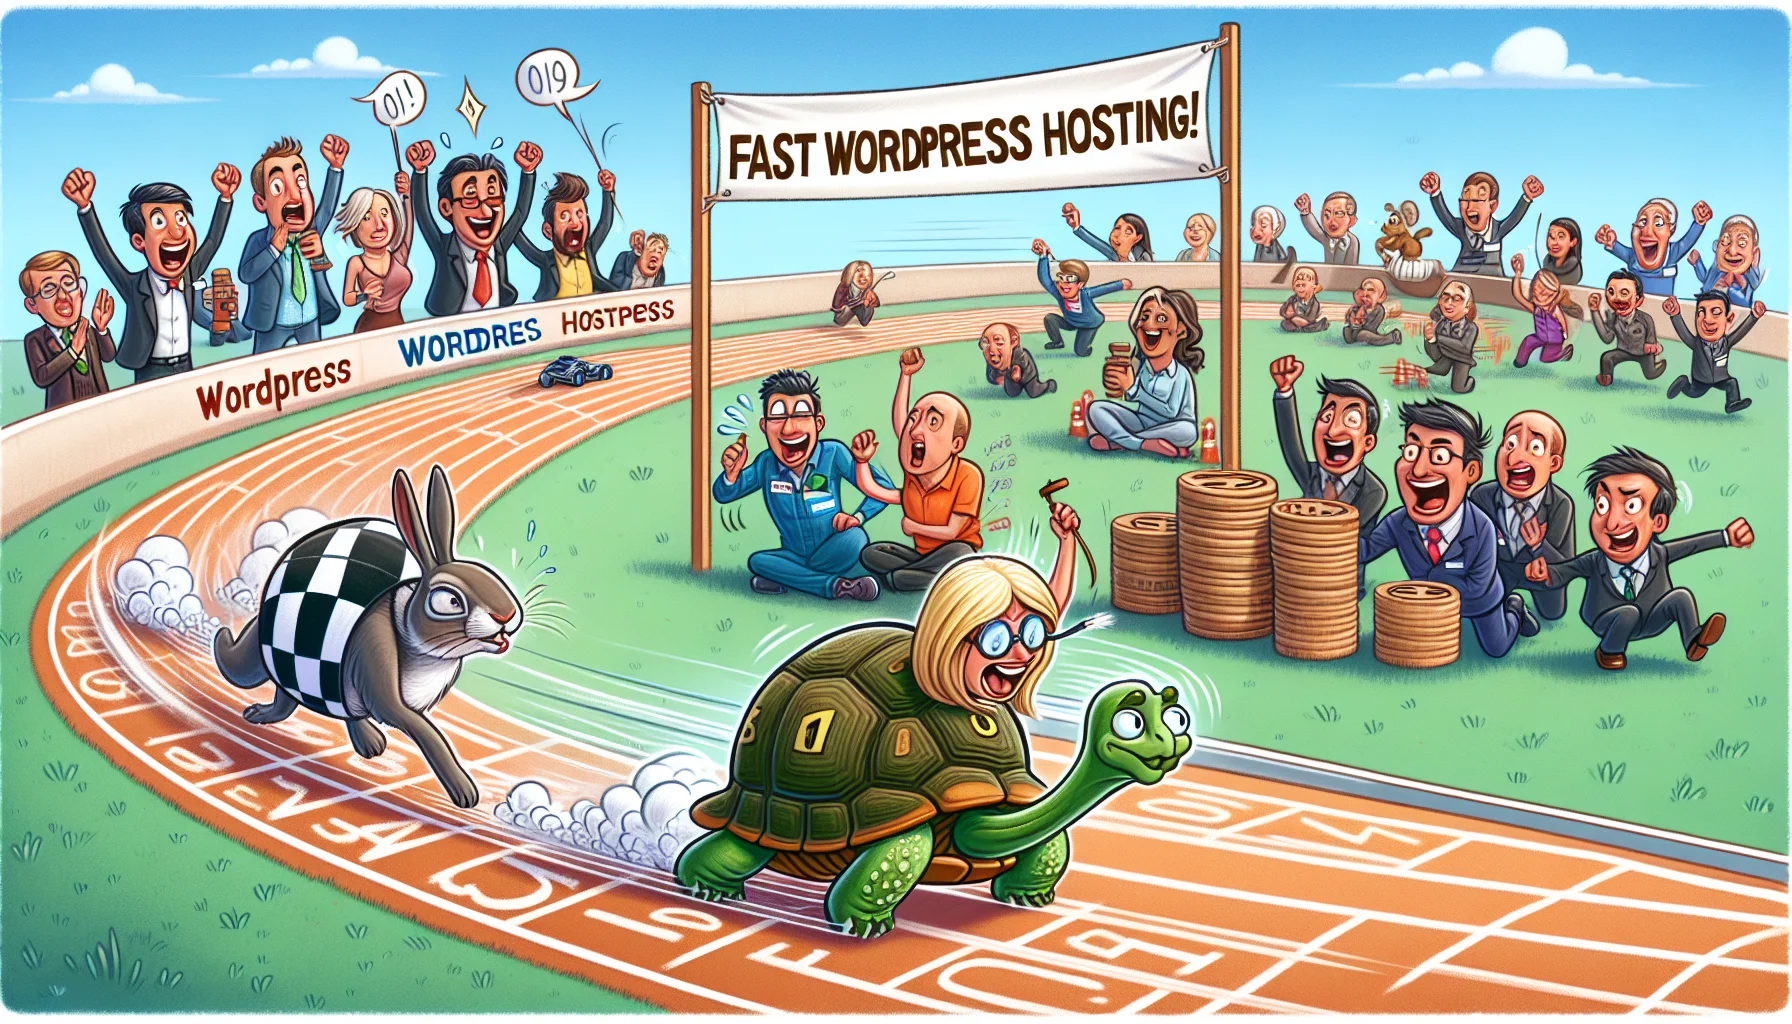 Imagine a humorous scenario showcasing the concept of fast Wordpress hosting. The setting is a racetrack with a tortoise and a hare. The hare, representing slow hosting, is huffing and puffing, lagging behind. The tortoise, symbolizing the speedy Wordpress hosting, is surging ahead with unexpected energy, leaving a trail of ones and zeros (binary code) behind to symbolize digital speed. The spectators are a mix of various professionals, men and women, from different descents cheering and expressing surprise. Above the racetrack, a banner proudly declares, 'Fast Wordpress Hosting!'. The whole scene has a touch of cartoonish exaggeration for comedic effect.